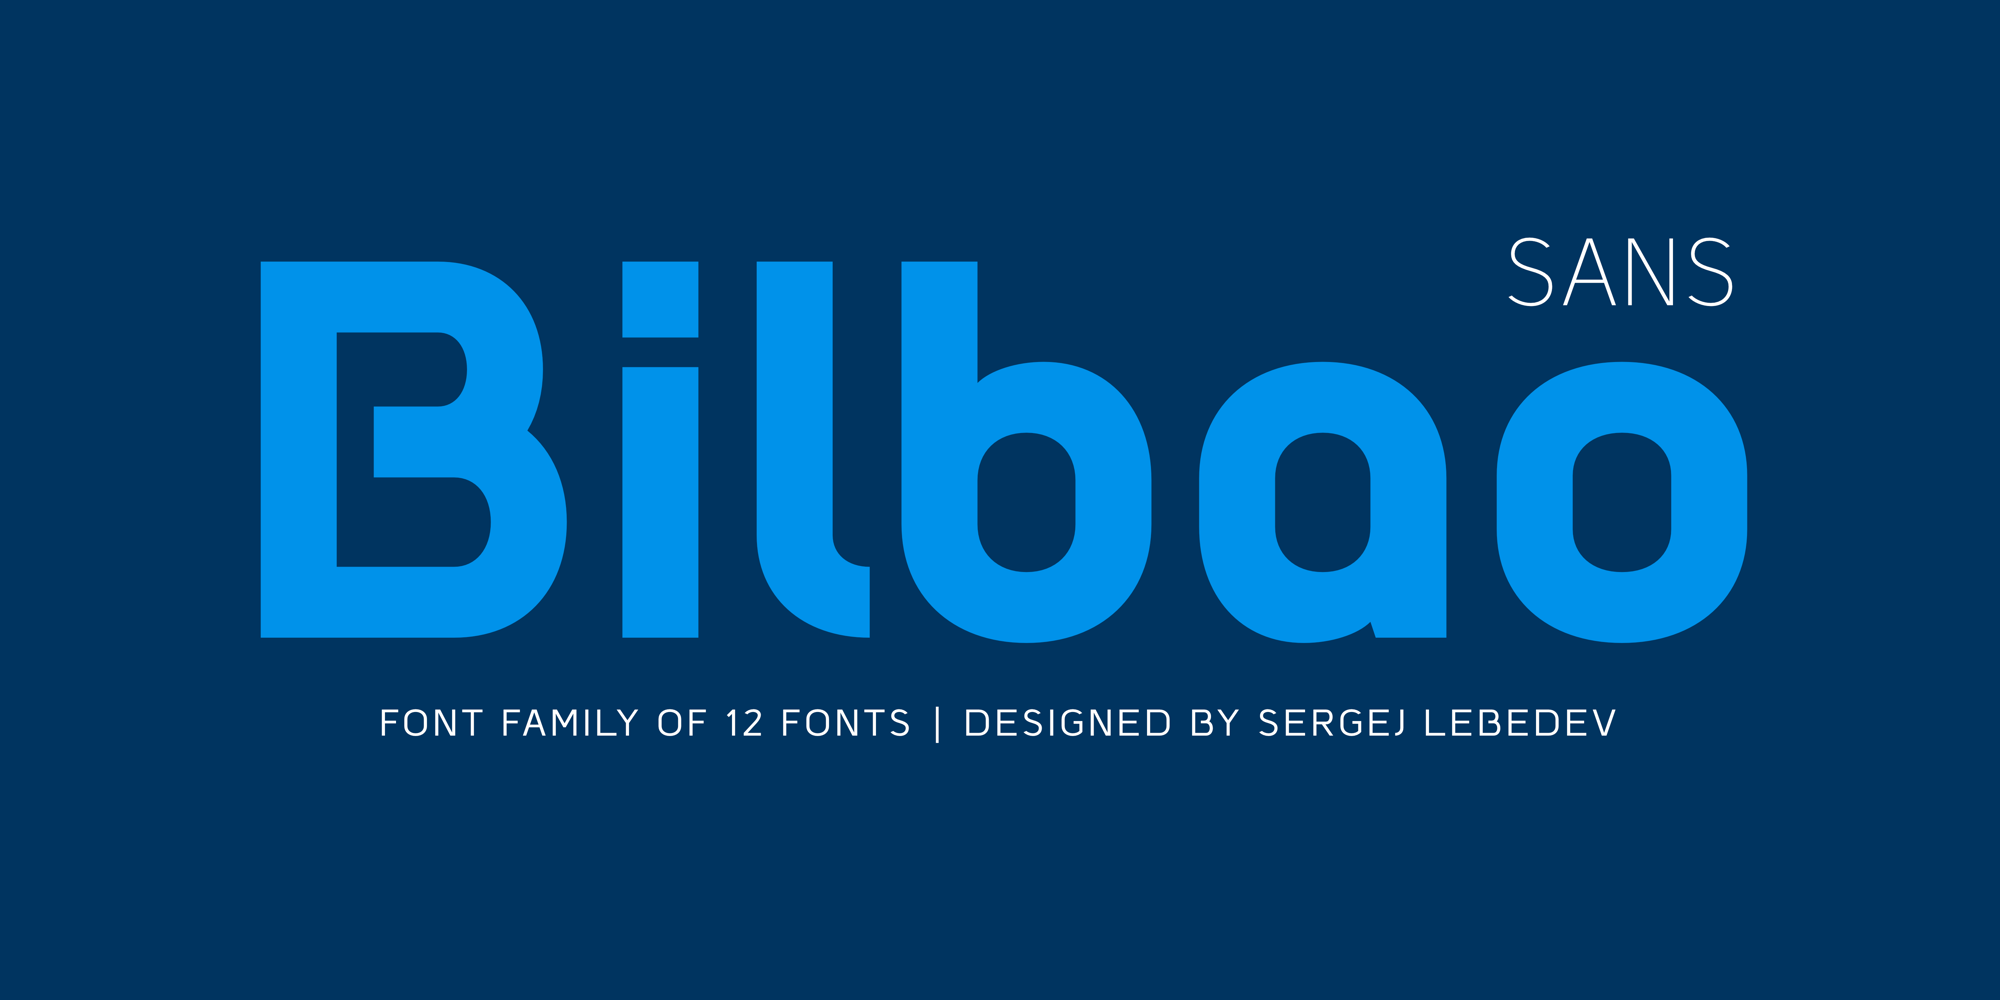 Bilbao Sans, a modern font family, is intelligently designed and engineered for print and screen. Bilbao Sans has an aesthetic, modern look and many Open Type Features. The font family "Bilbao Sans consists of 6 weights (Thin, Extra Light, Light, Regular, Medium, Bold) and Obliques for each format.